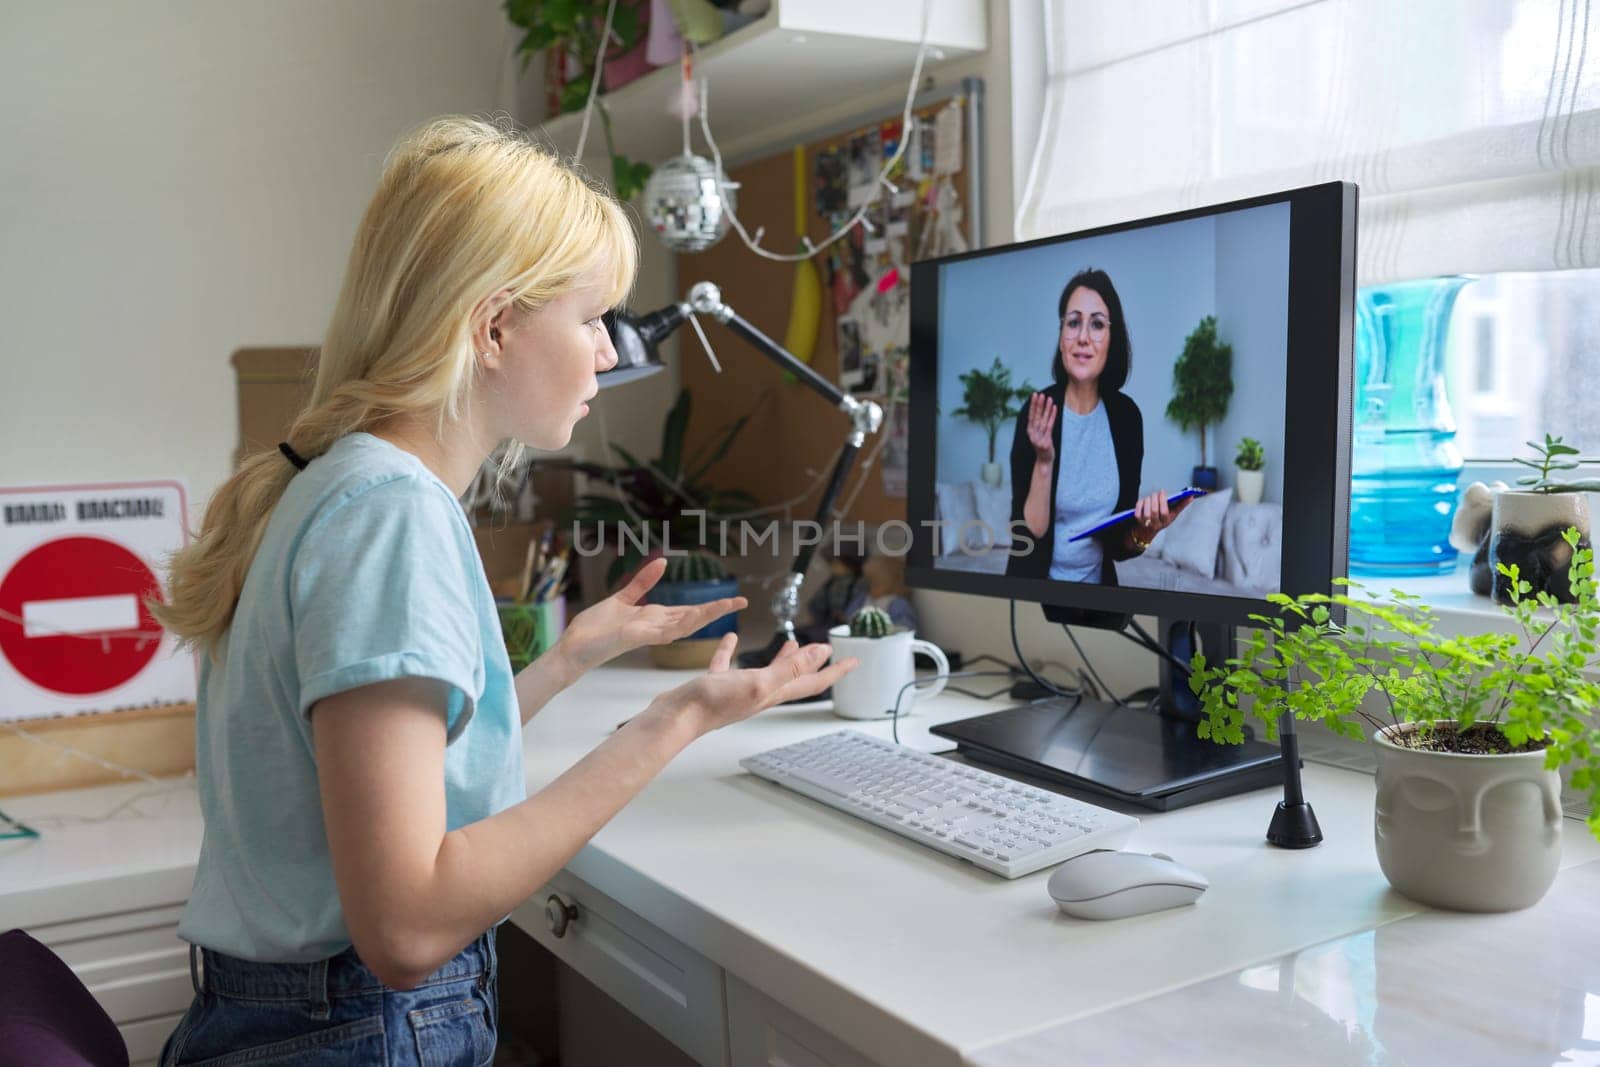 Online session of teenage girl and psychologist, social worker. Young female talking to therapist, teacher, at home looking at computer screen. Professional help, mental health, education, adolescence